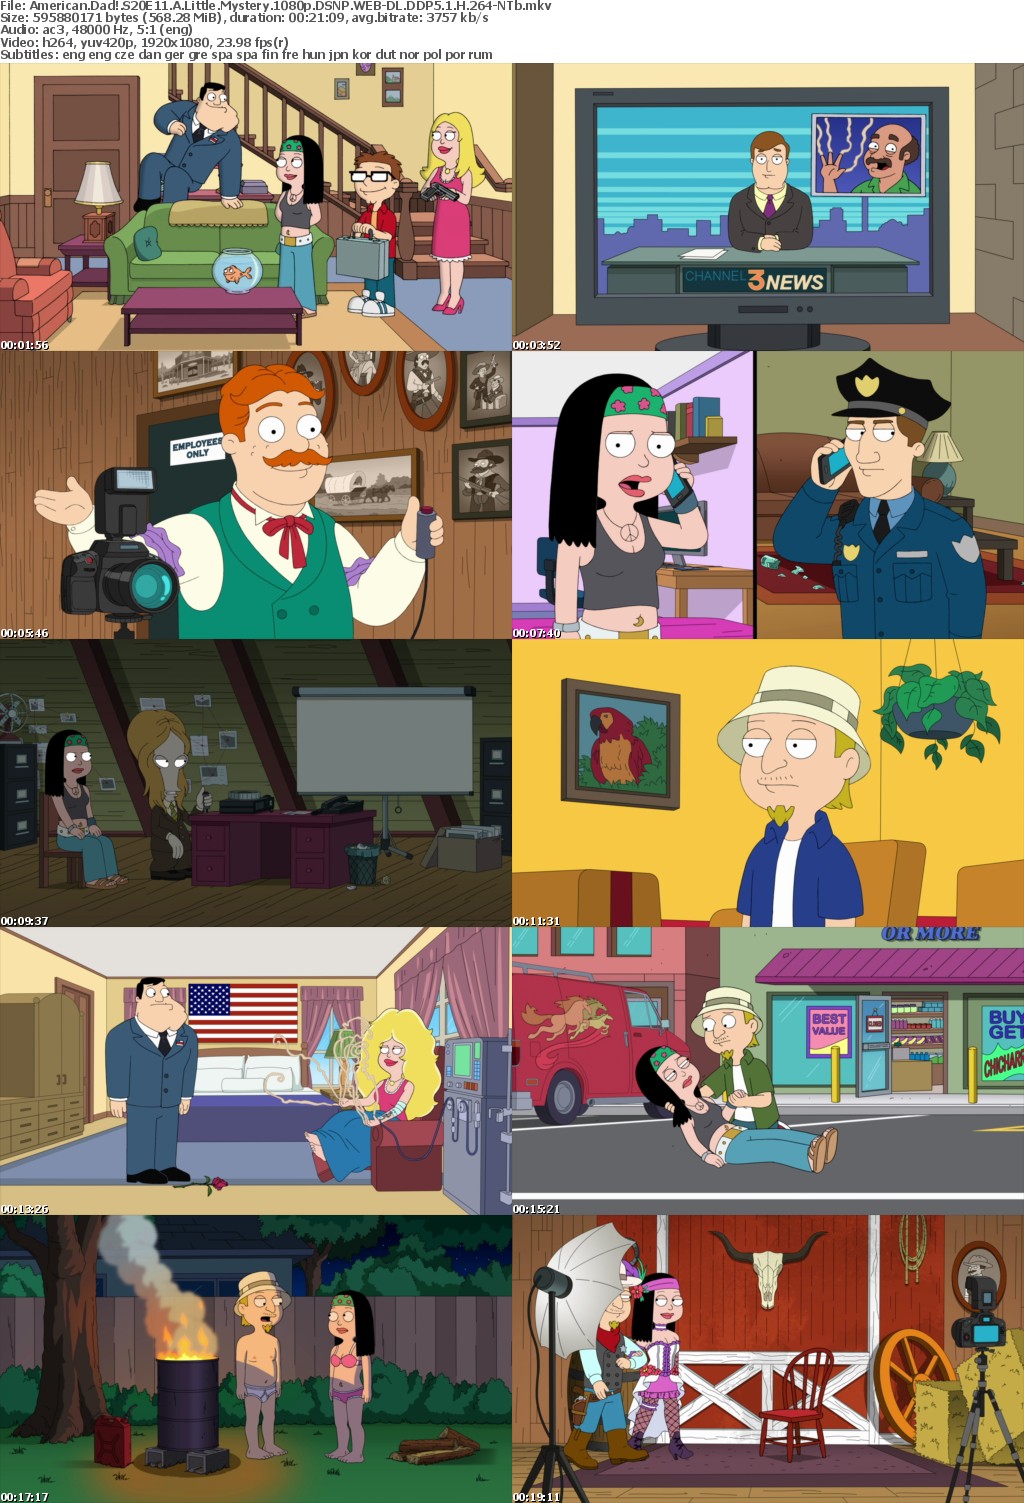 American Dad! S20E11 A Little Mystery 1080p DSNP WEB-DL DDP5 1 H 264-NTb